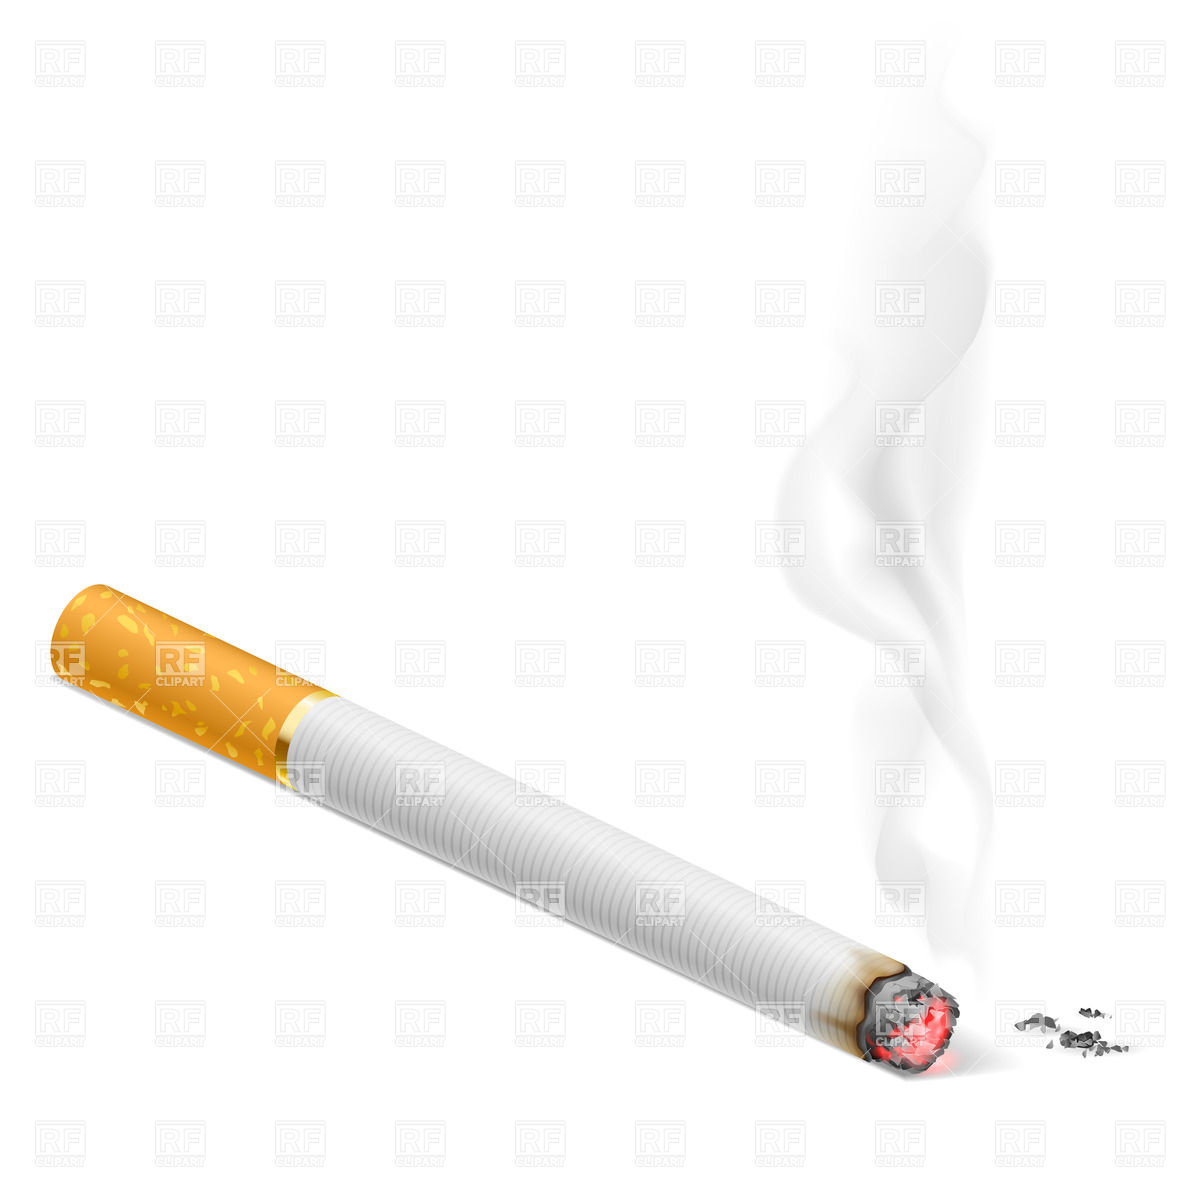 Smoking Cigarette 20516 Objects Download Royalty Free Vector Clip